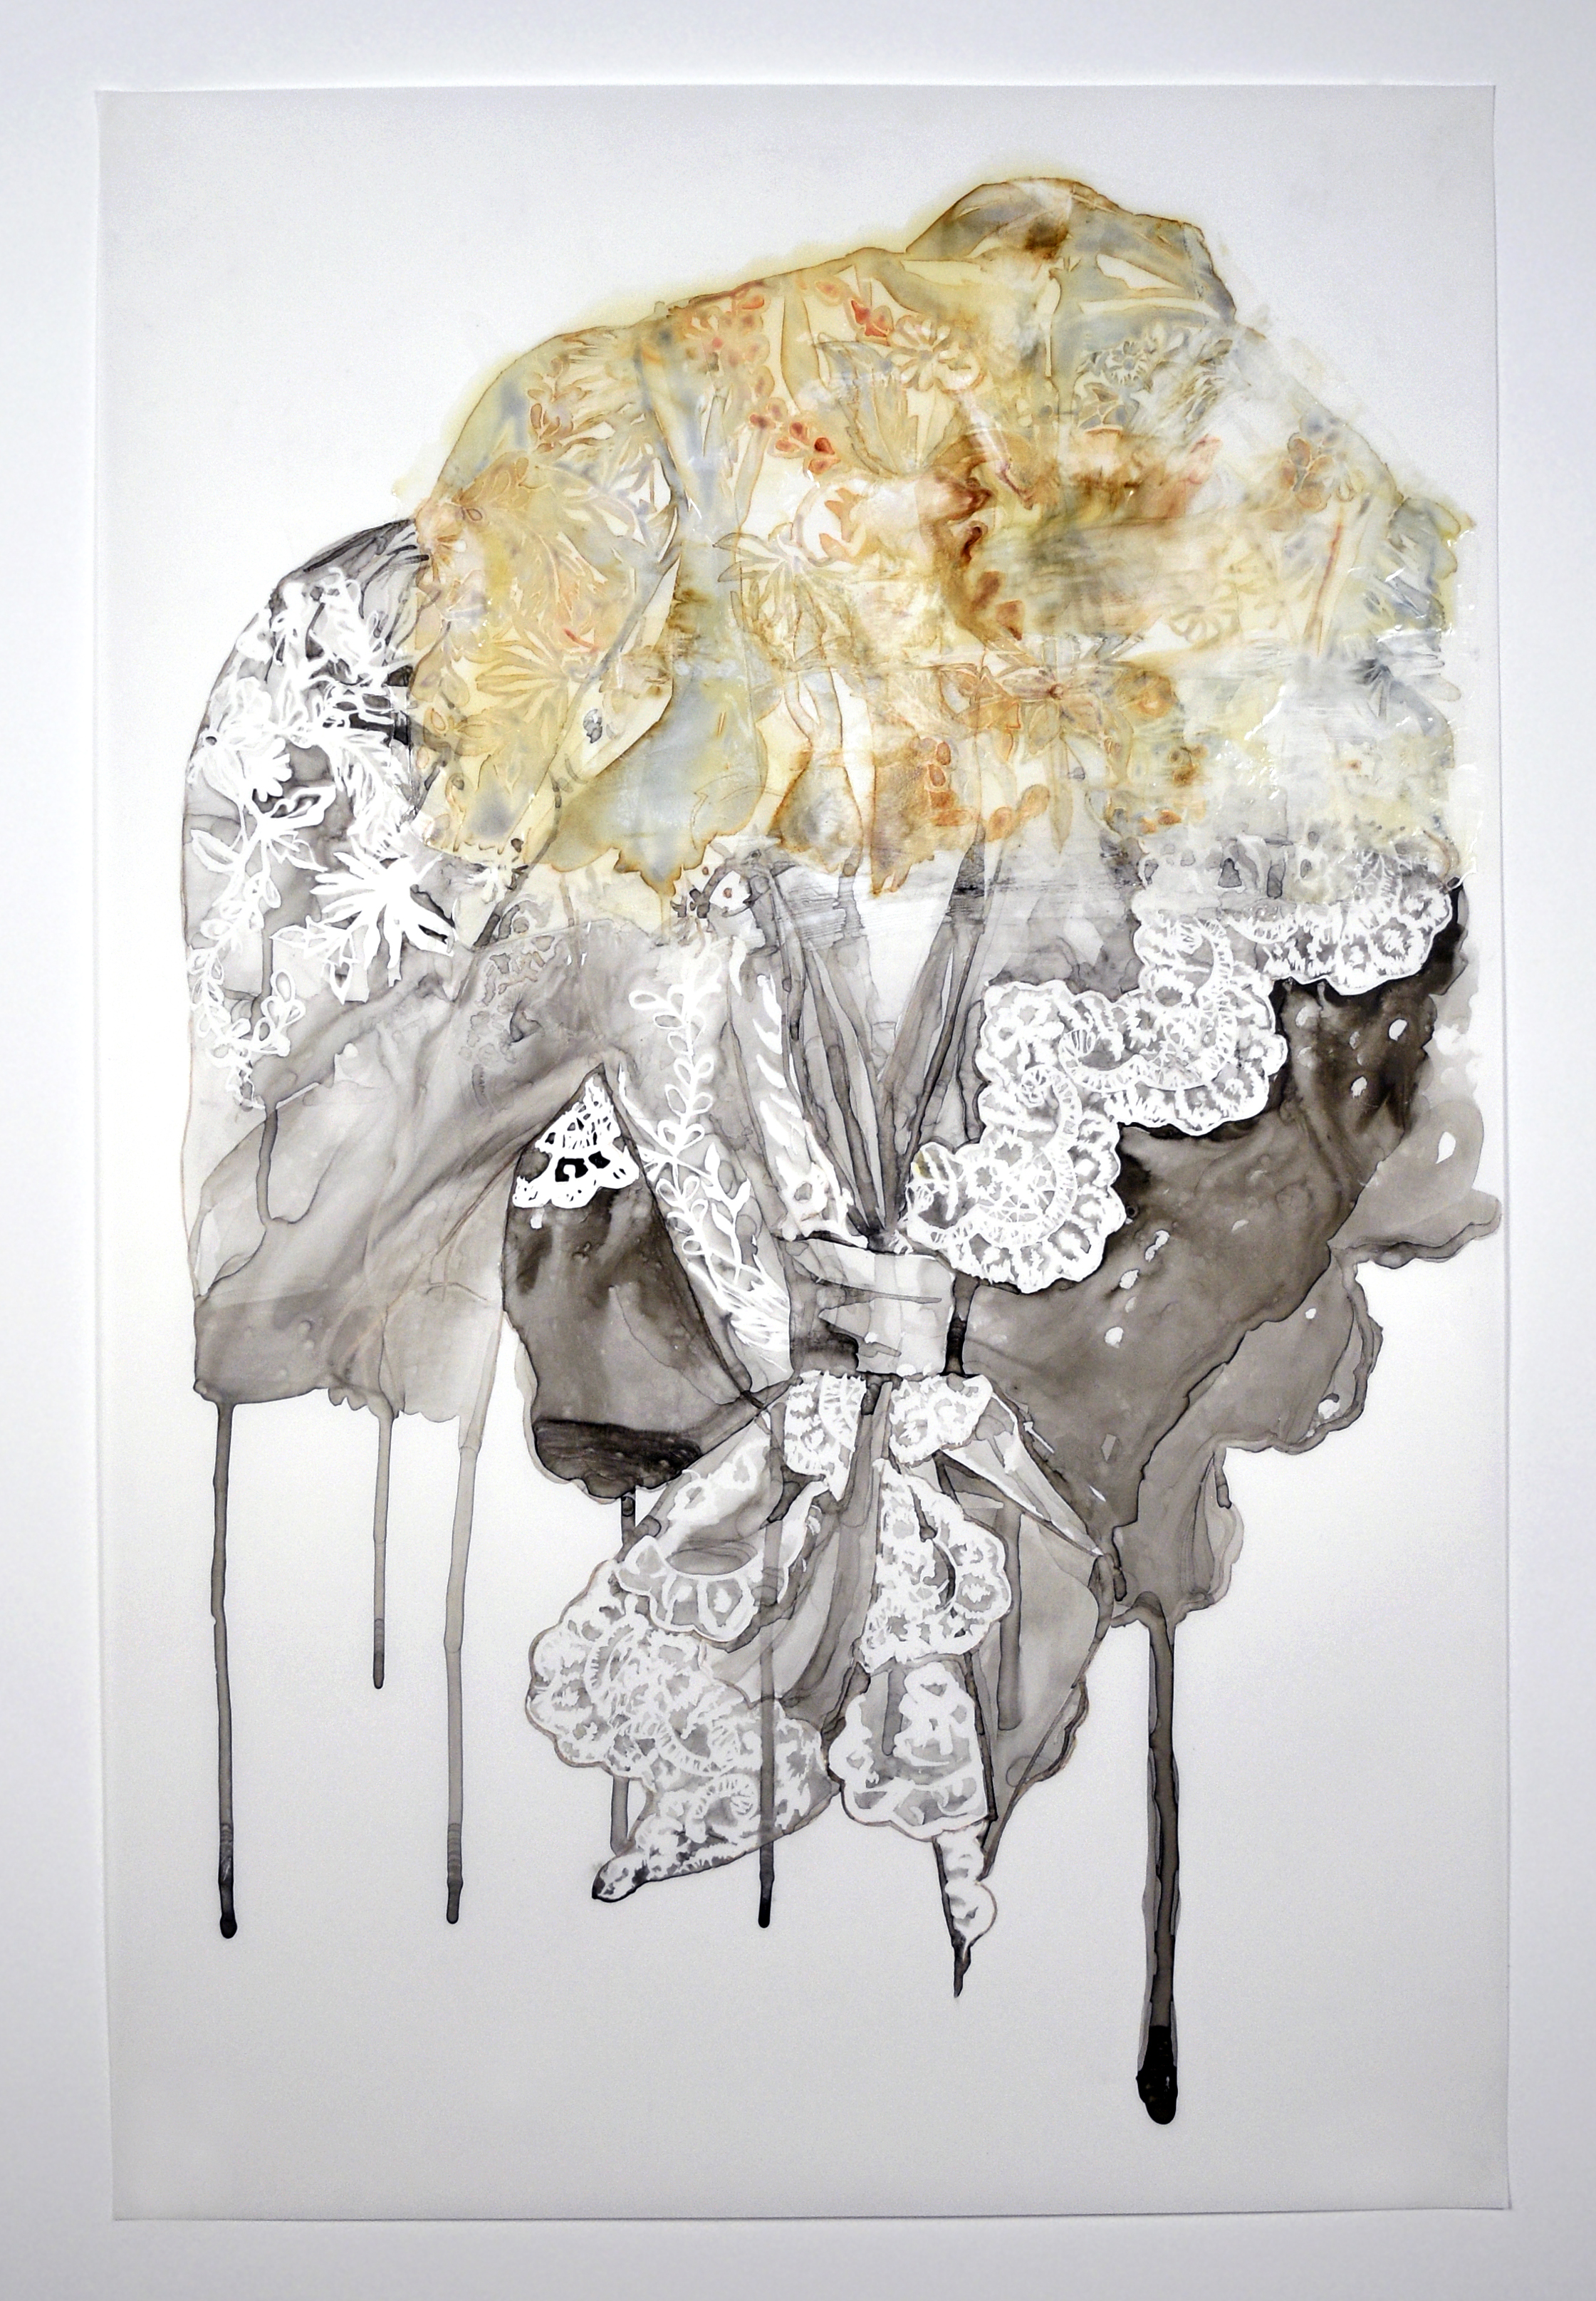   Hybrid , 2015.&nbsp;Monoprint, sumi ink, &amp; acrylic medium on Yupo paper, 35" x 23"  (In Private Collection) 